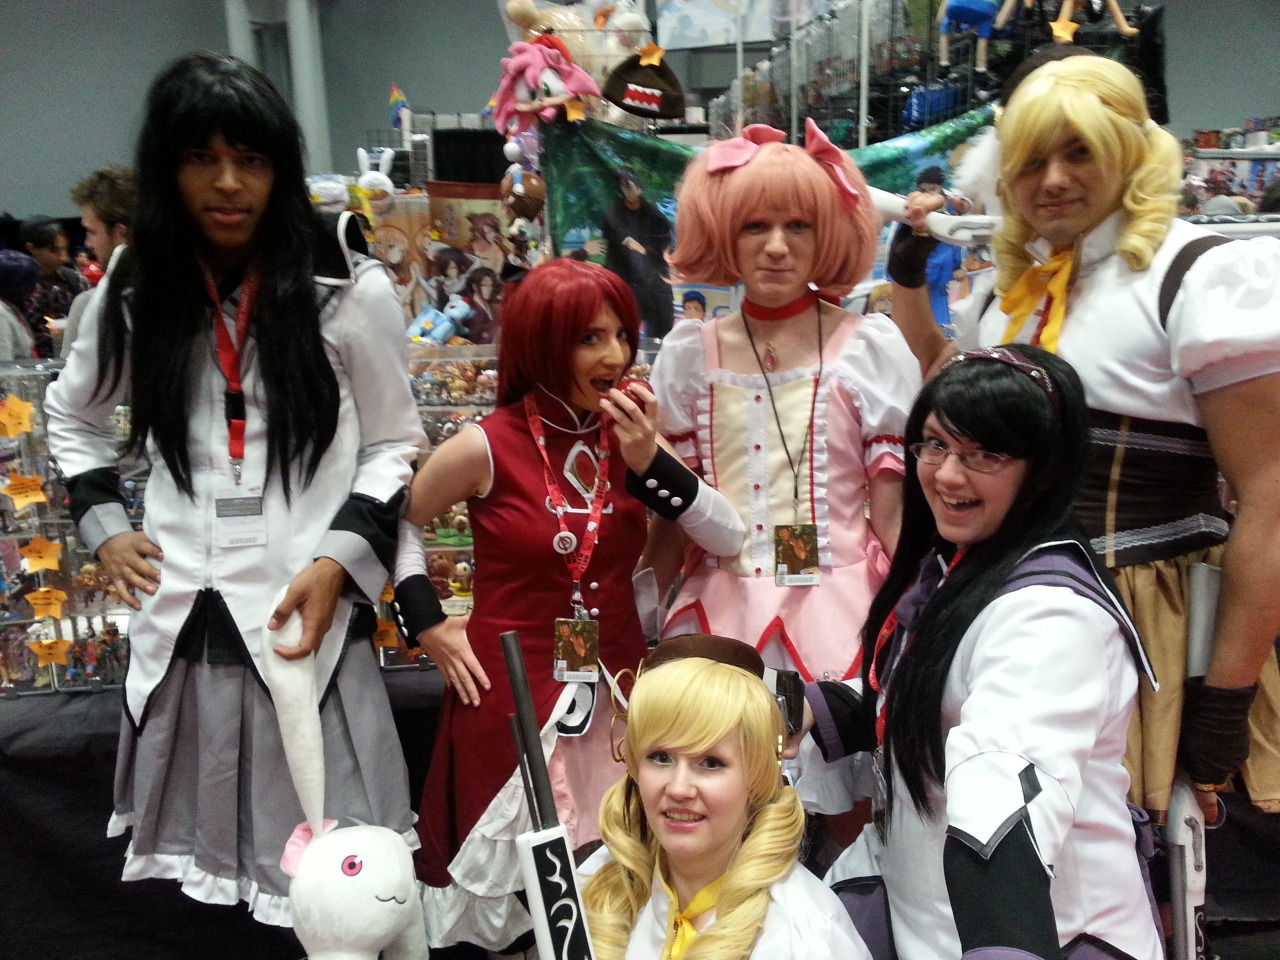 Some shots from Saturday of NYCC featuring our Puella Magi Madoka Magica group as